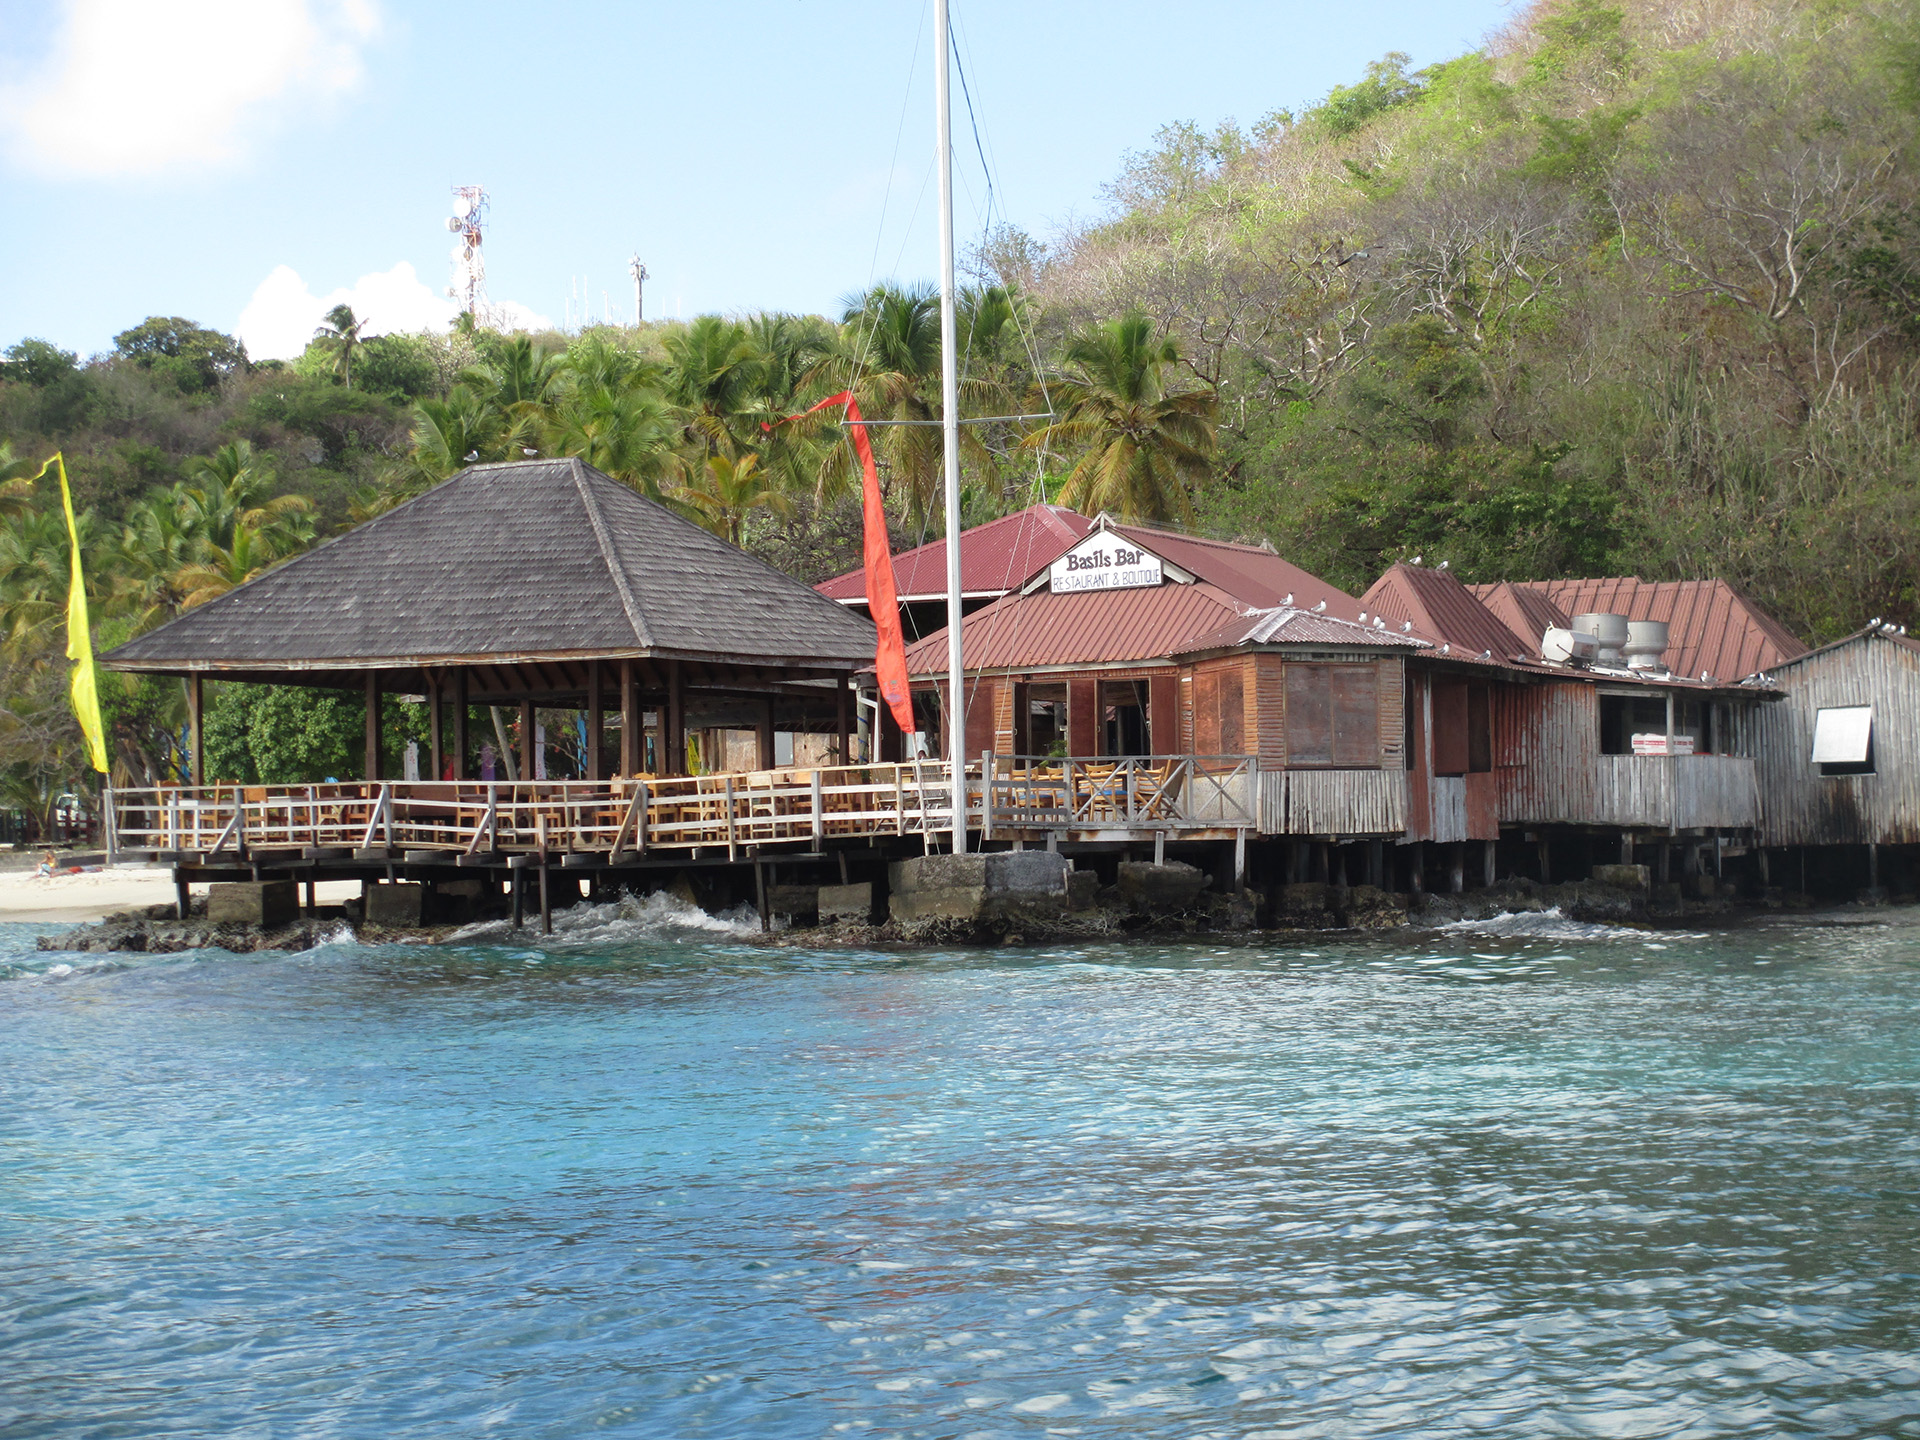 View from the water of Basil's Bar, Mustique